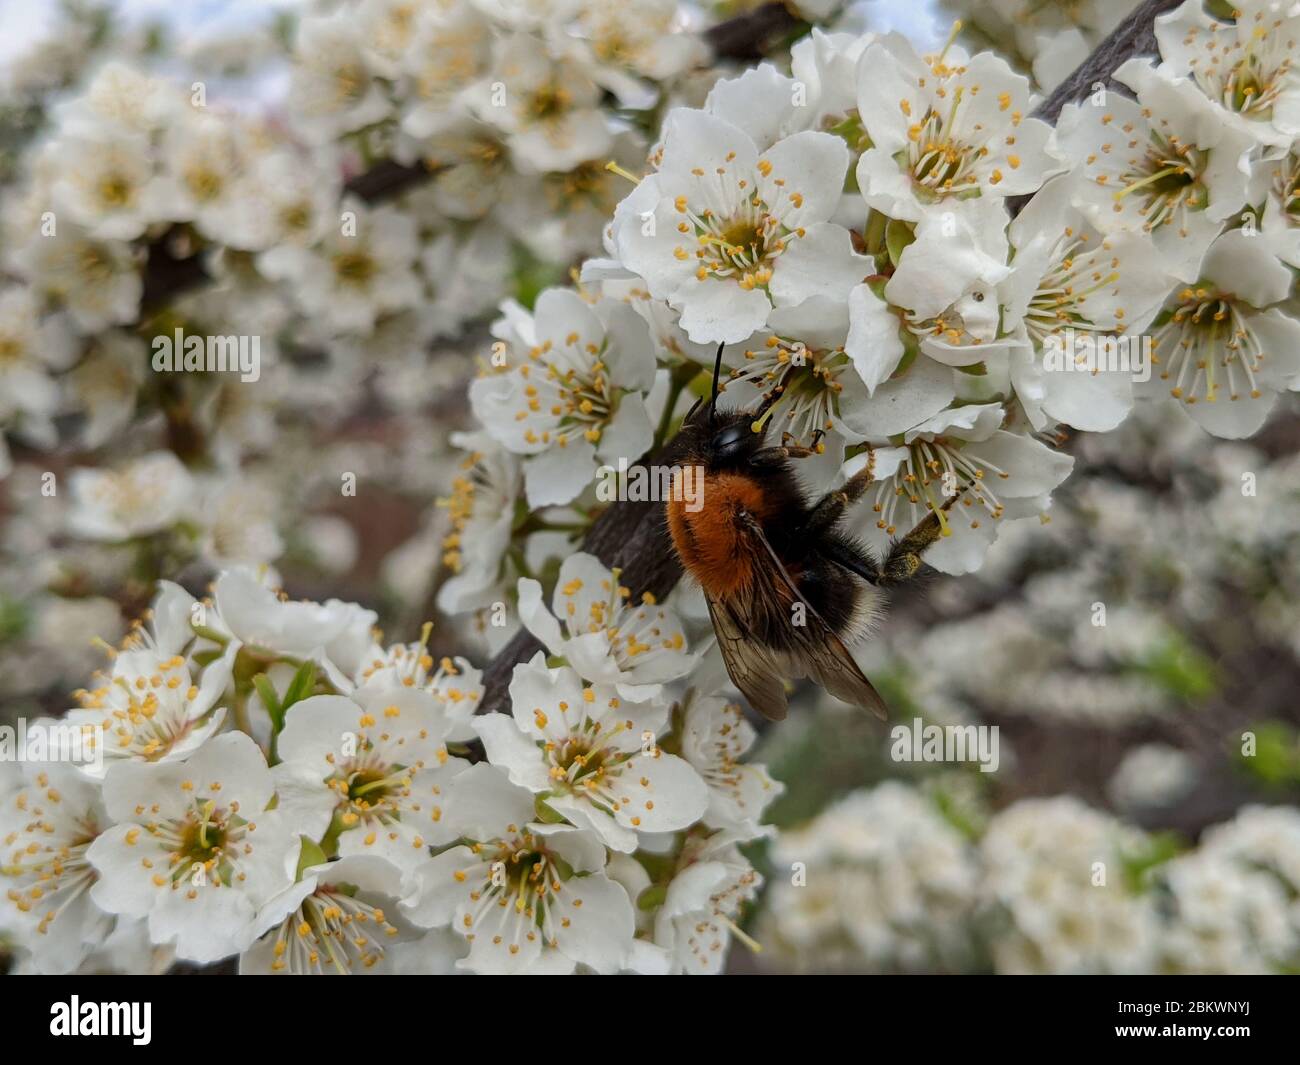 Blooming sakura in early spring. A bee on a cherry flower. A bee pollinates flowers in the spring. Macro photo. Small details close-up. Stock Photo